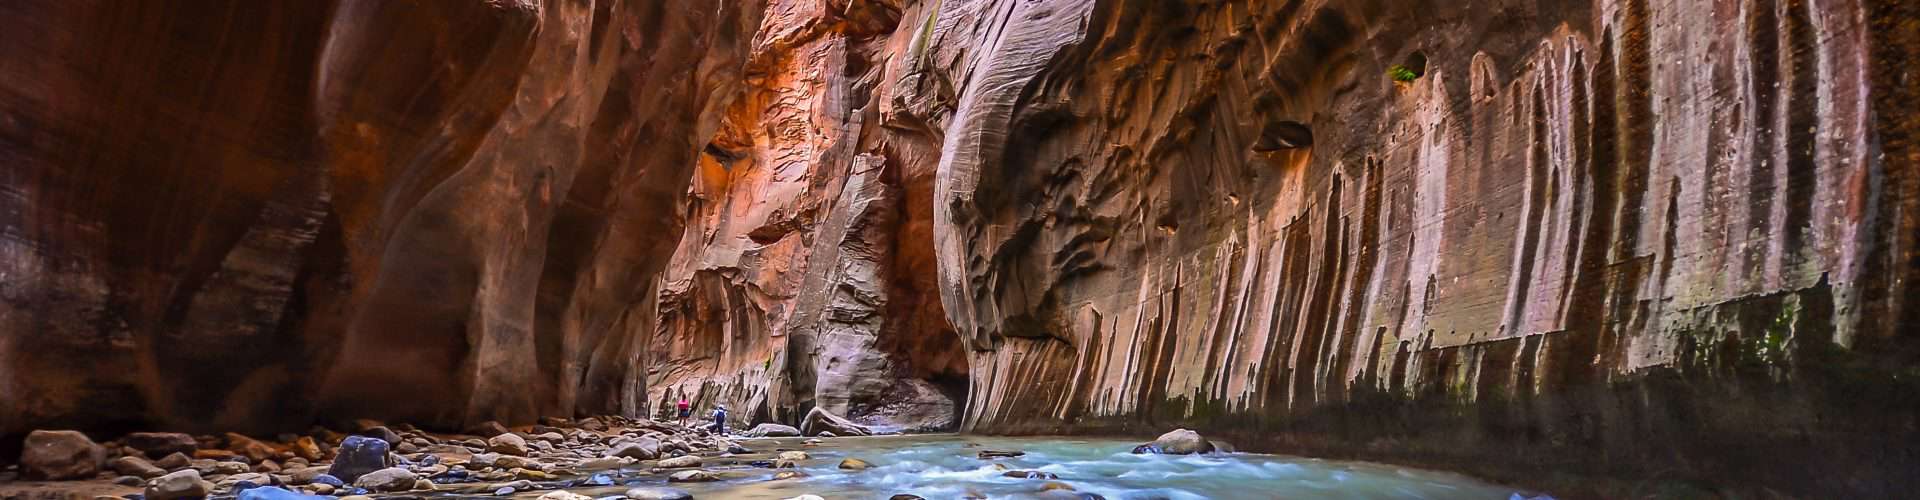 A tight corridor of the Narrows in Zion National Park